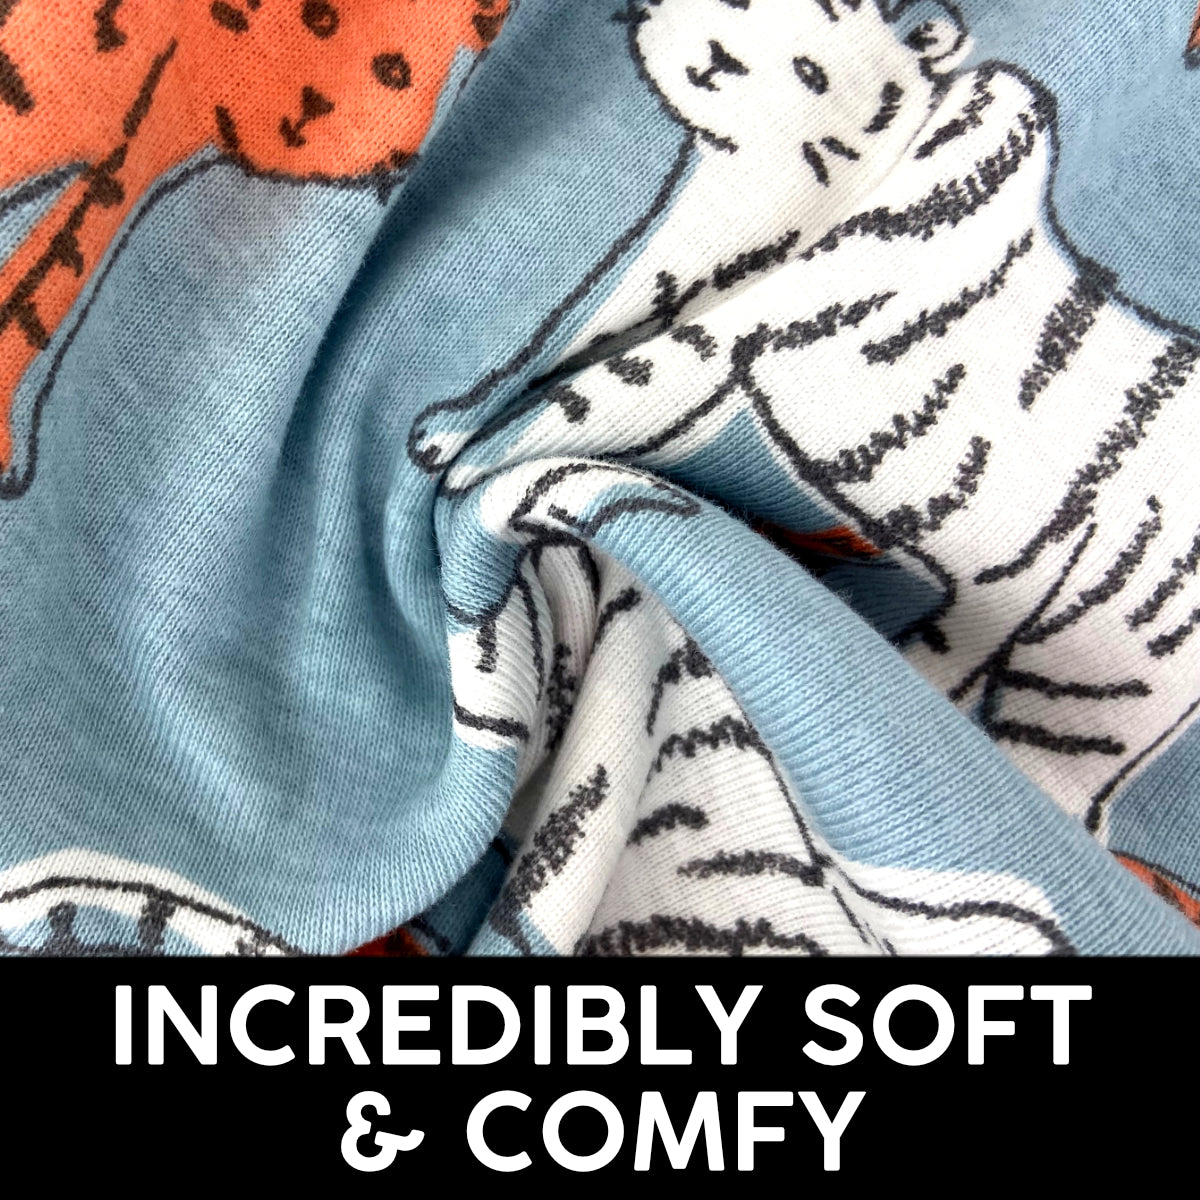 Unbelievably Soft Jersey Cotton Knit Pajamas in Fun Novelty Prints. If you're looking for a  pair of go-to pants to wear around the house then look no further! 